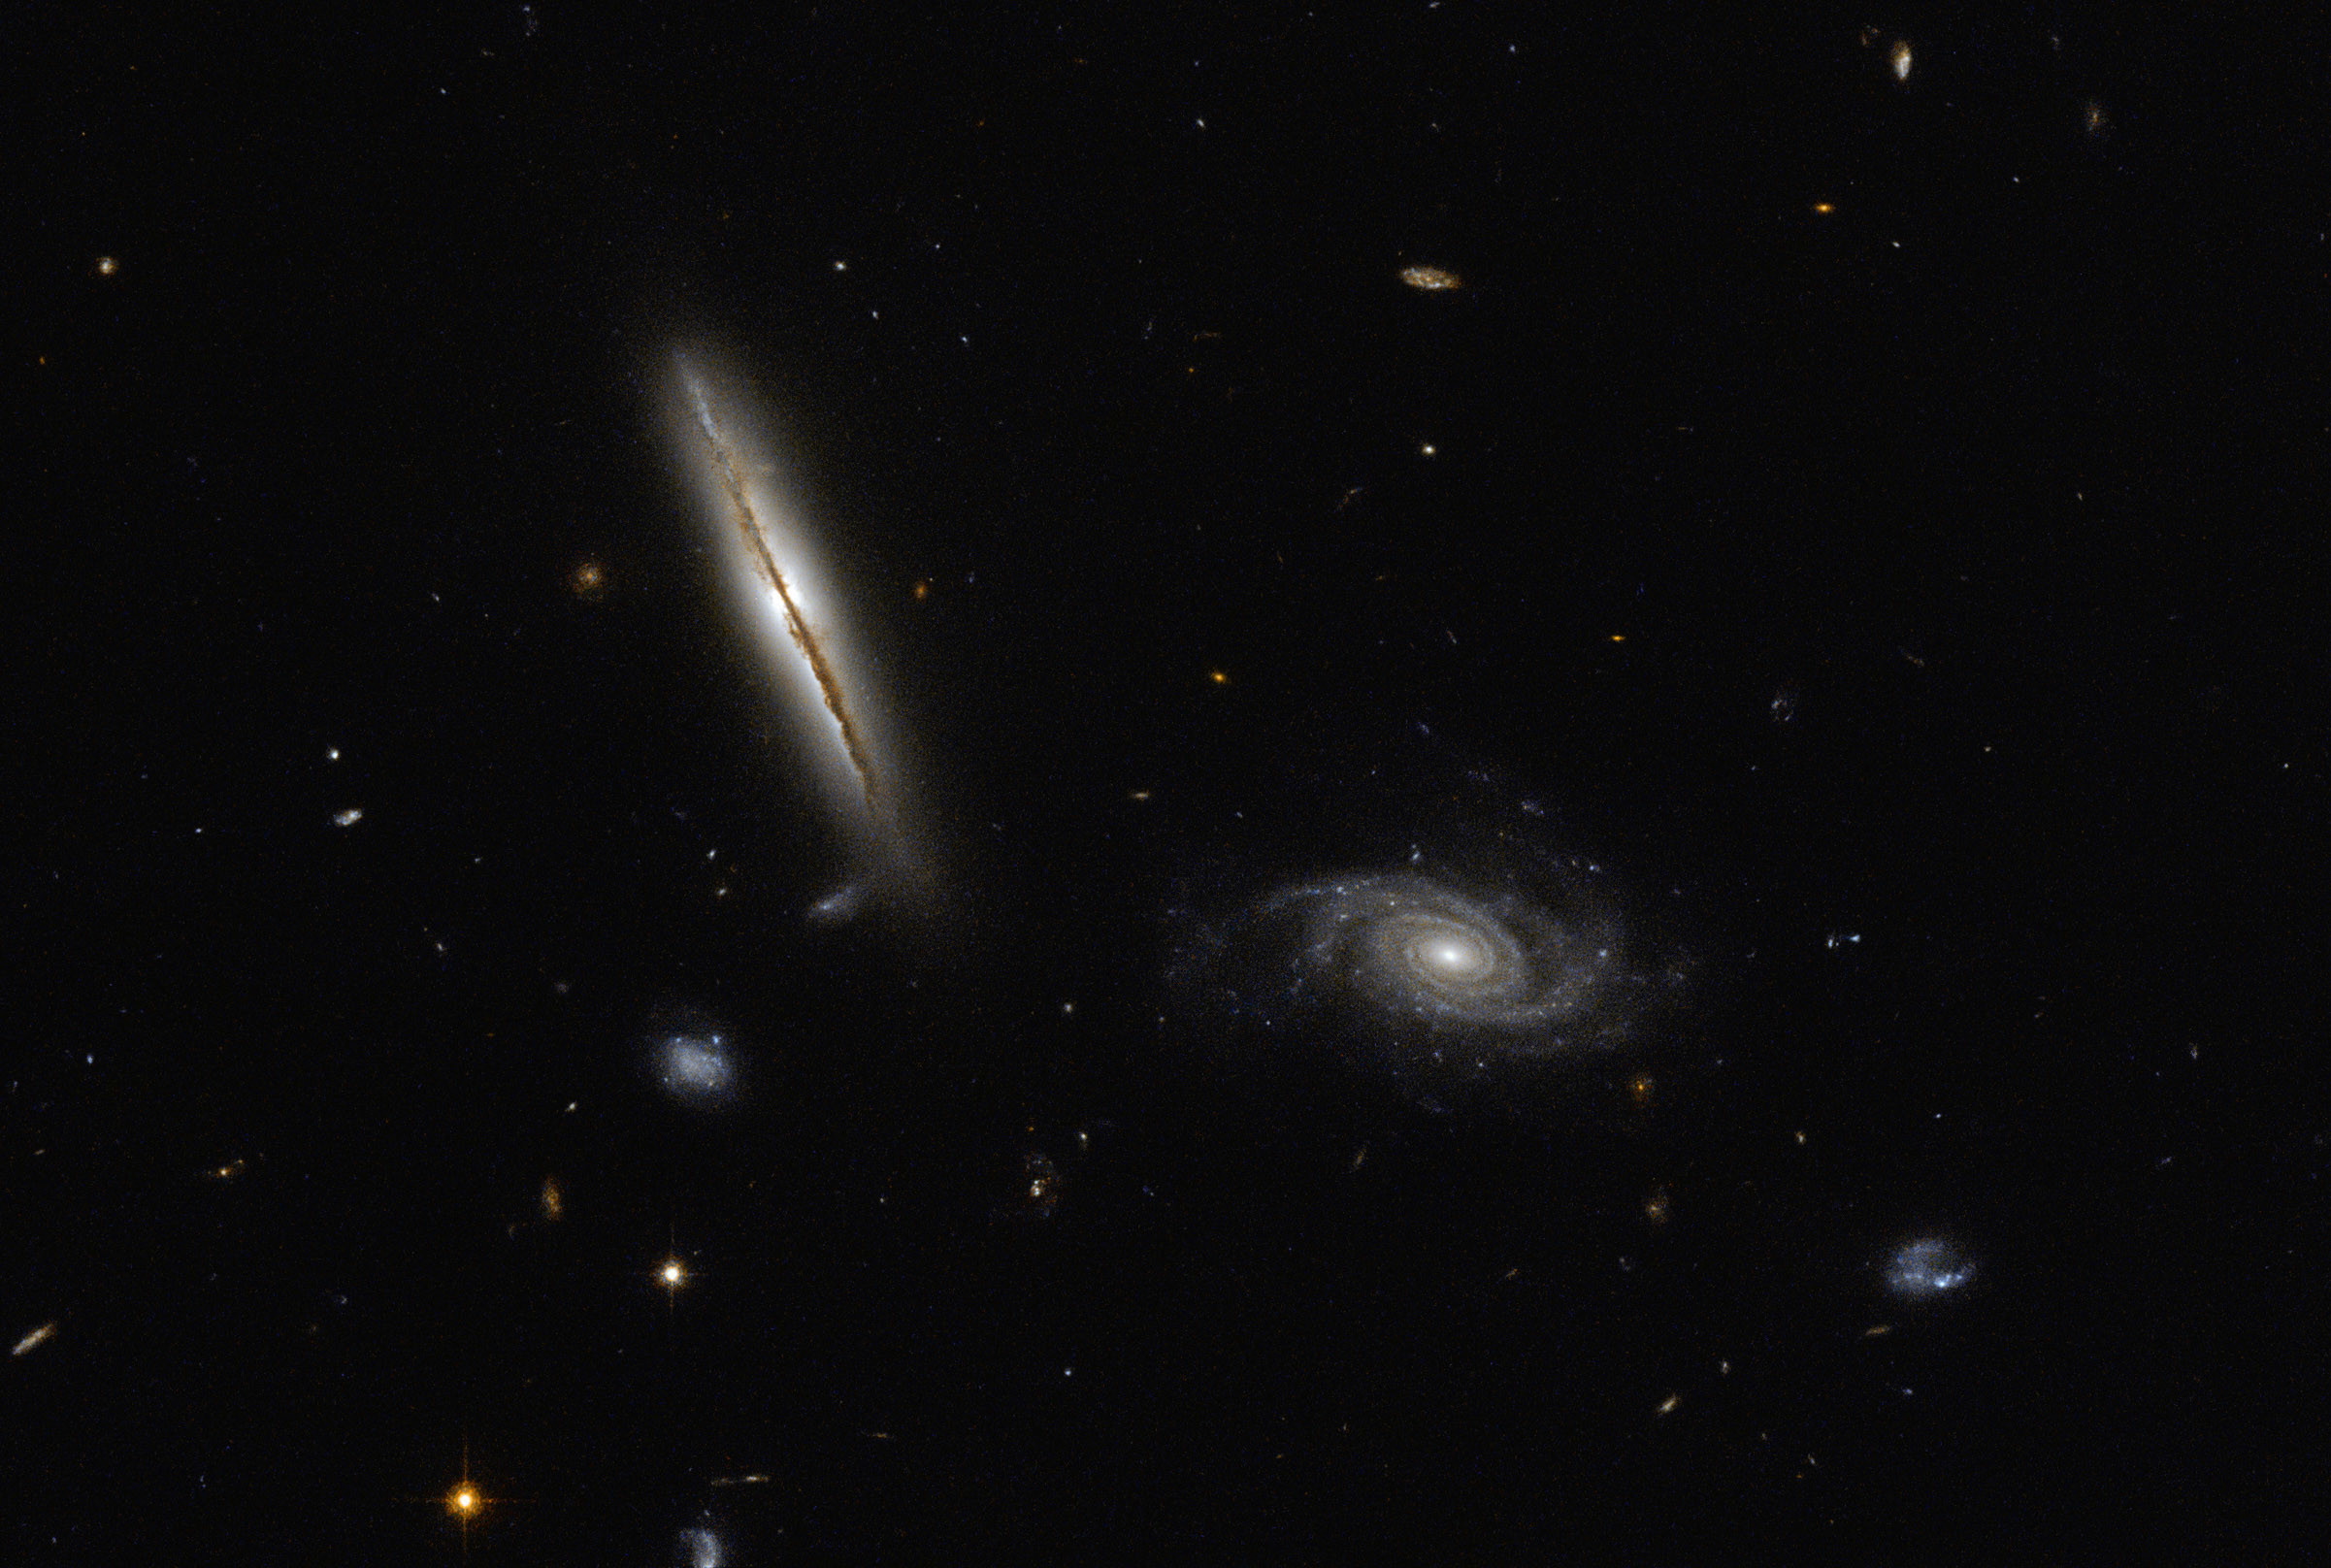 Hubble Space Telescope image of spiral galaxies LO95 0313-192 (left) and [